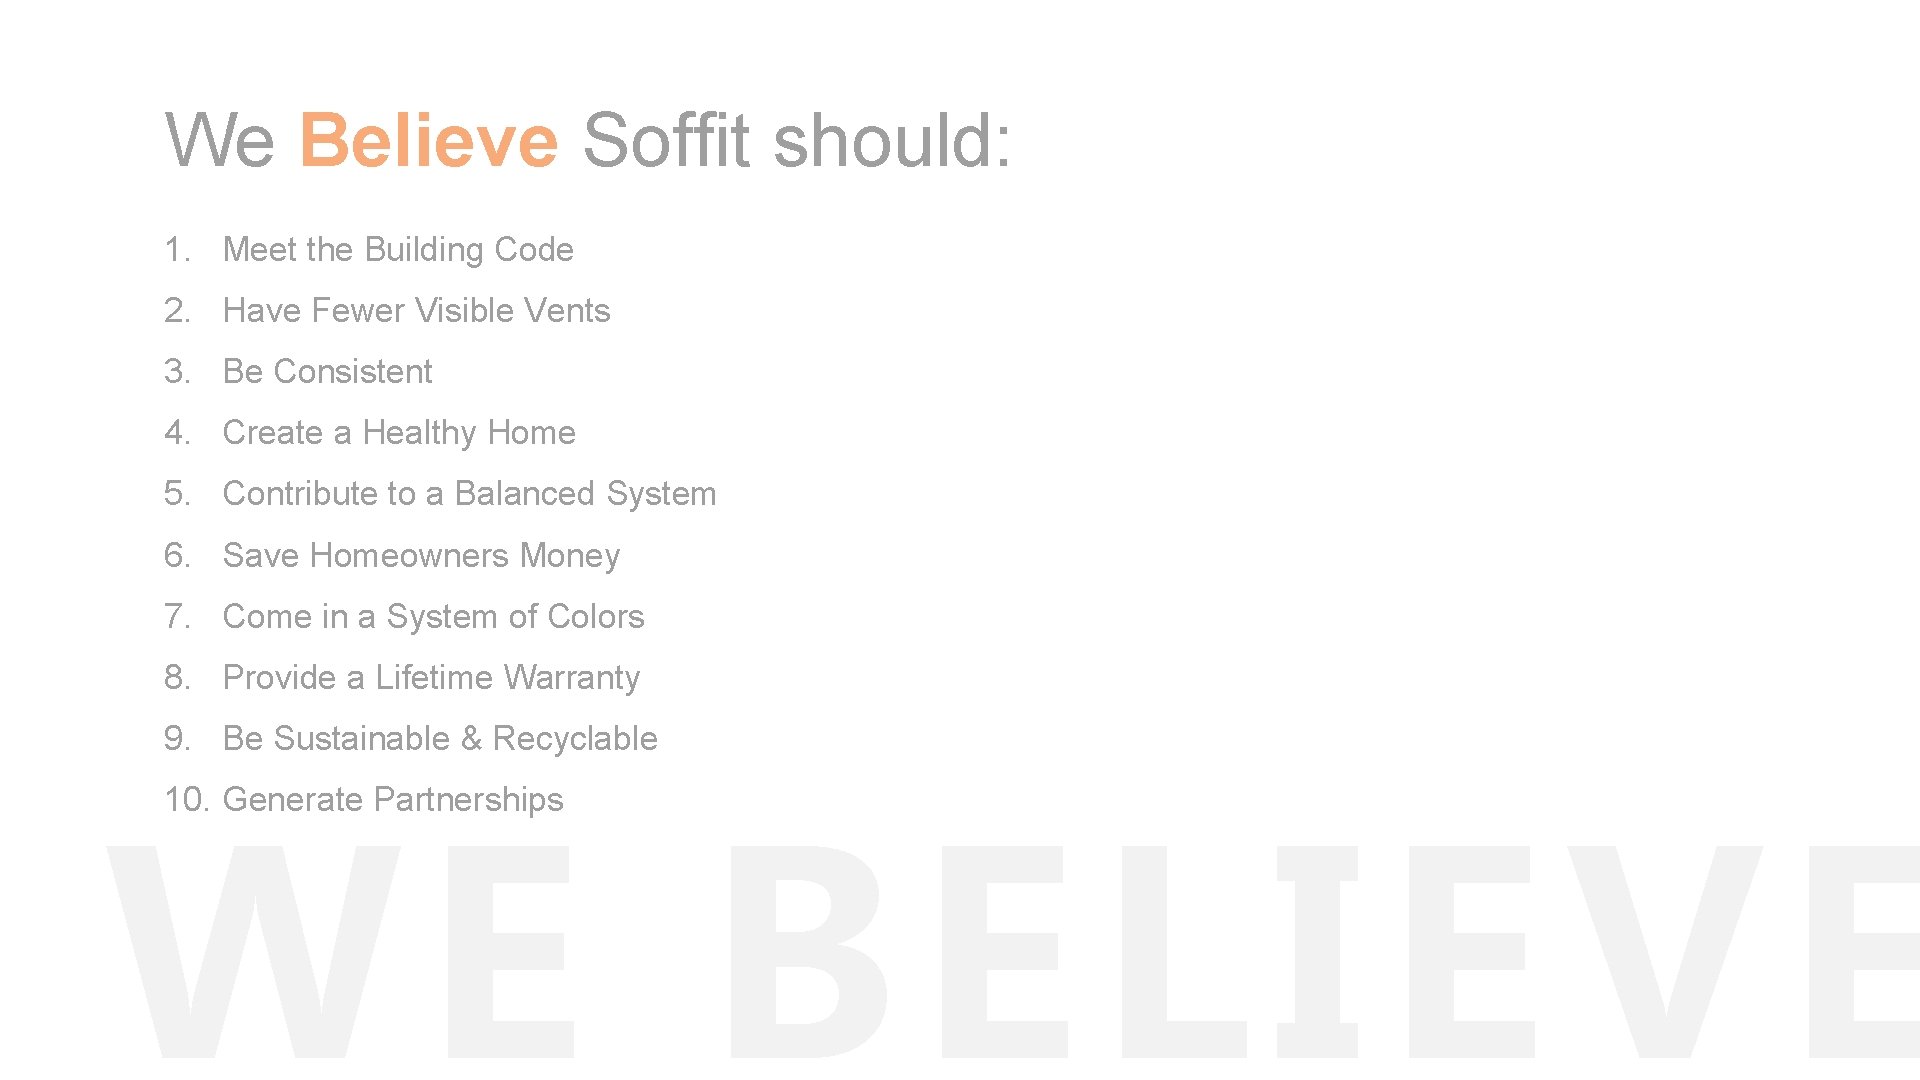 We Believe Soffit should: 1. Meet the Building Code 2. Have Fewer Visible Vents